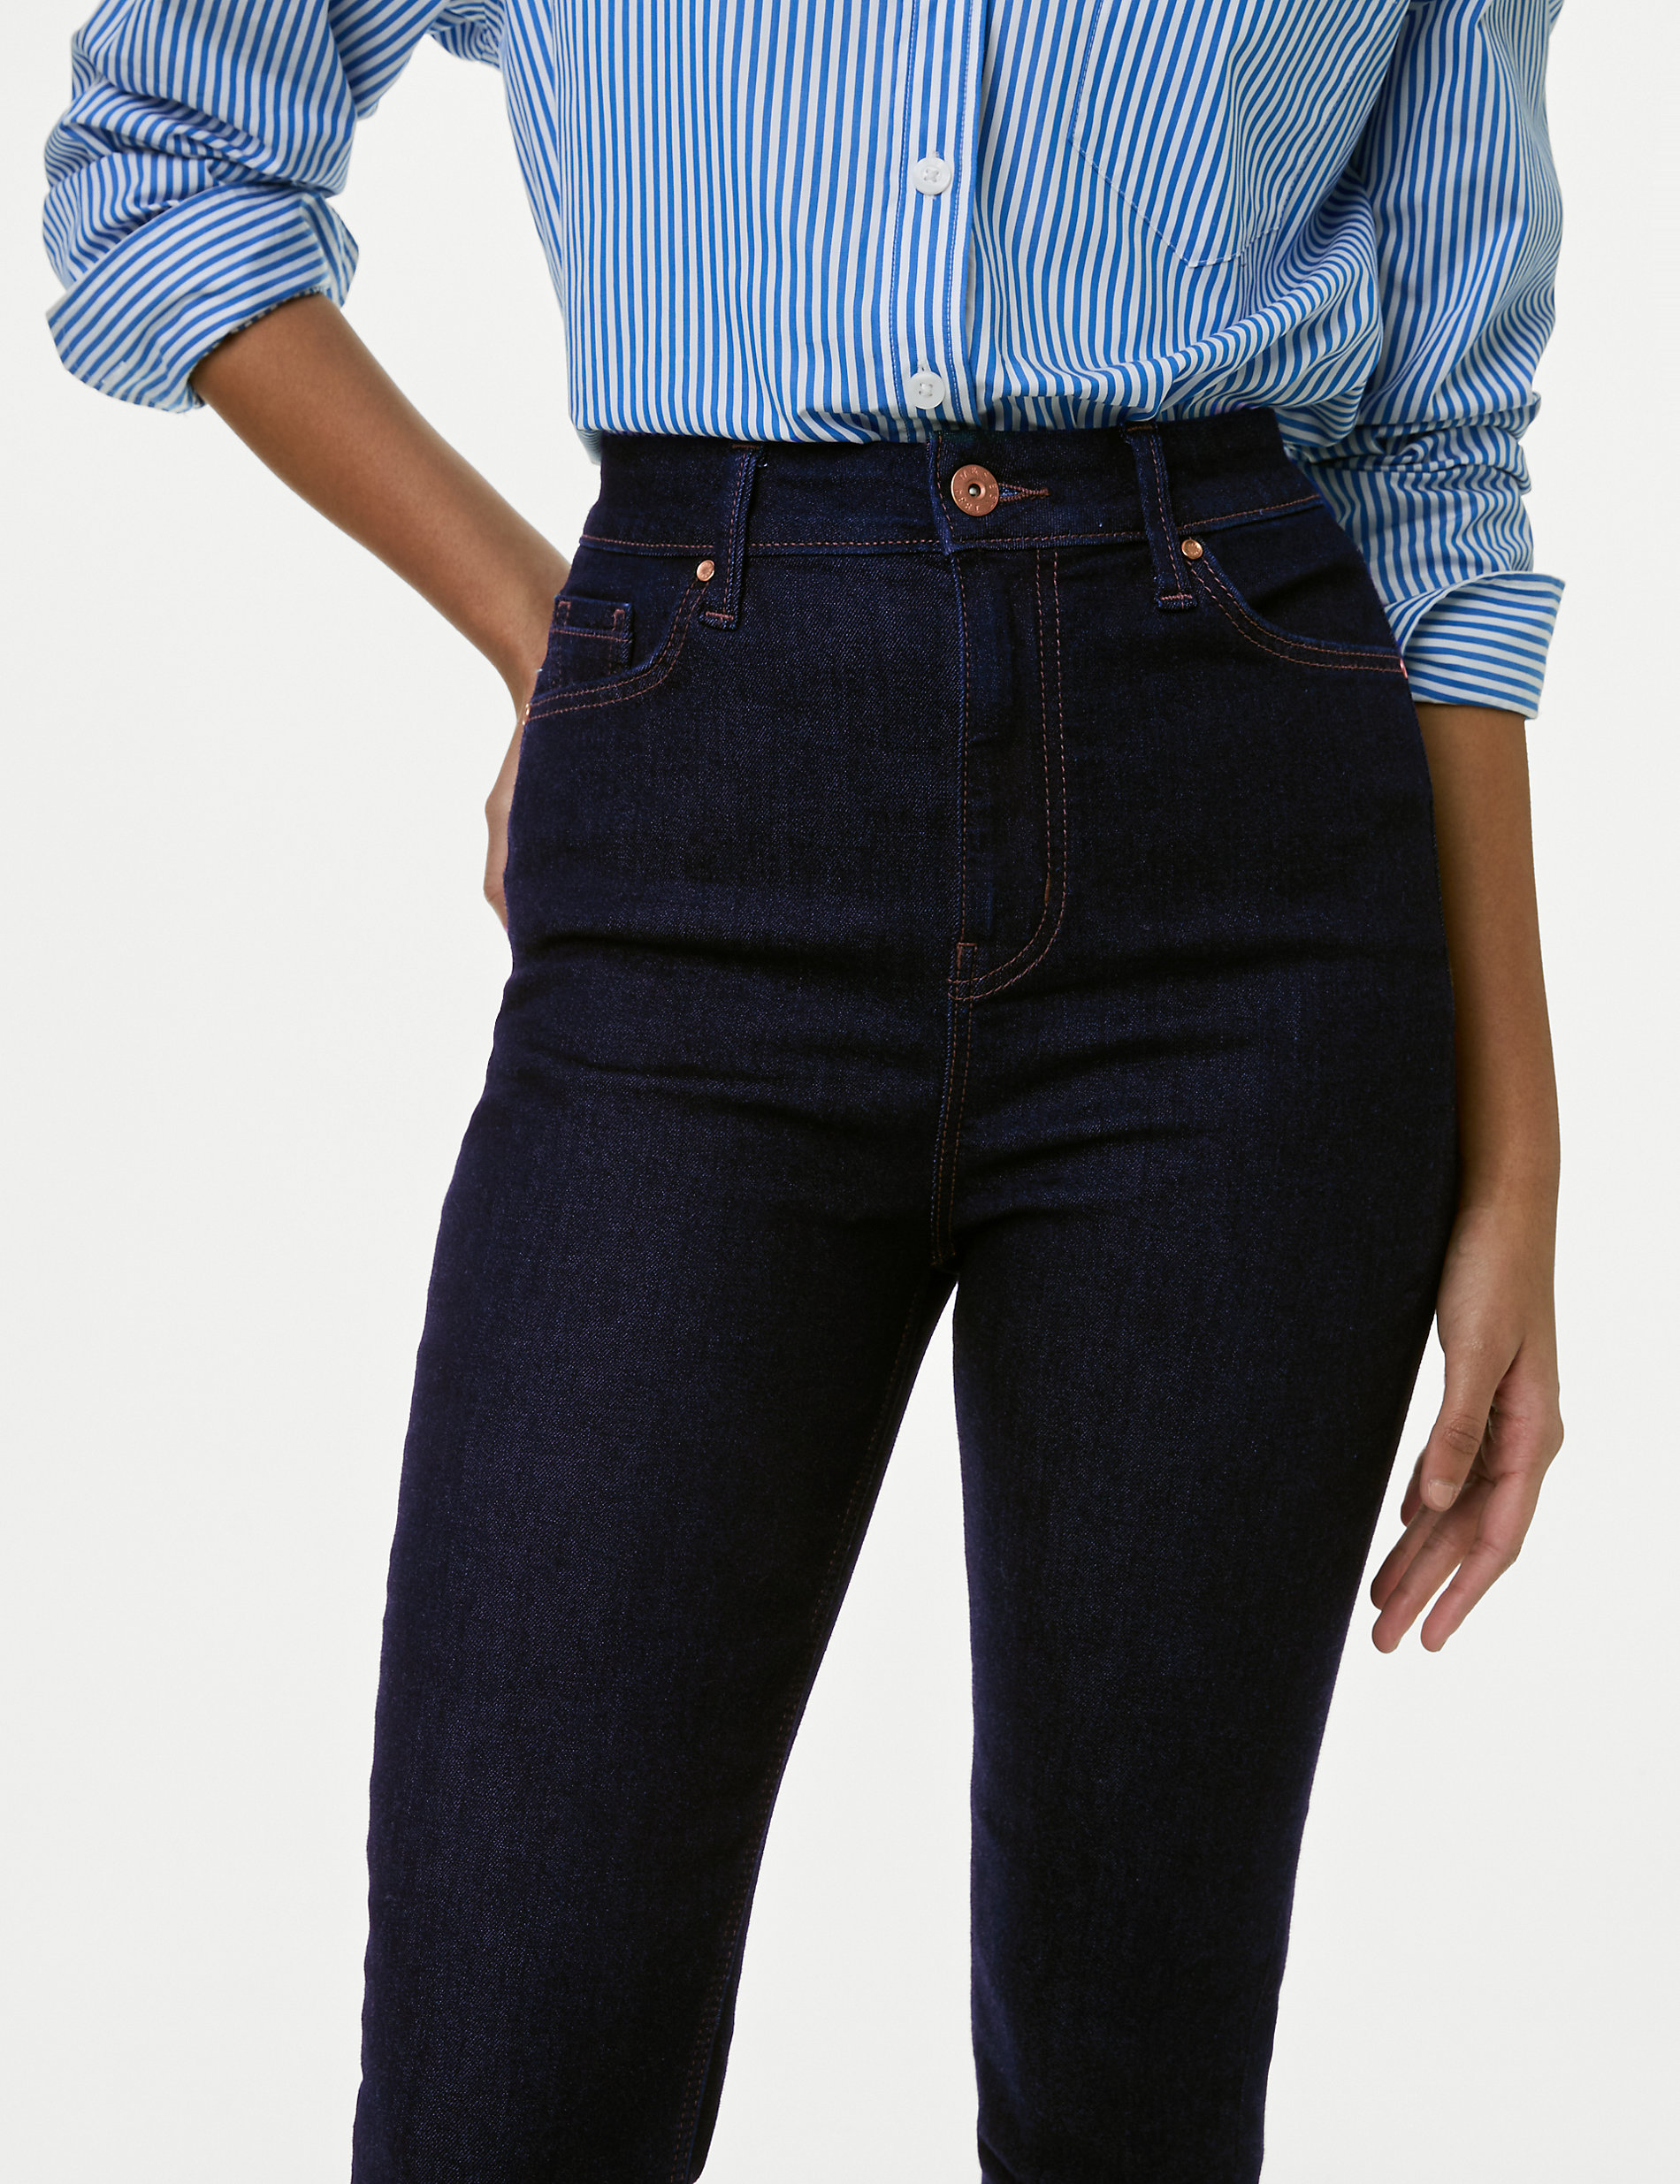 Ivy Supersoft High Waisted Skinny Jeans | M&S US